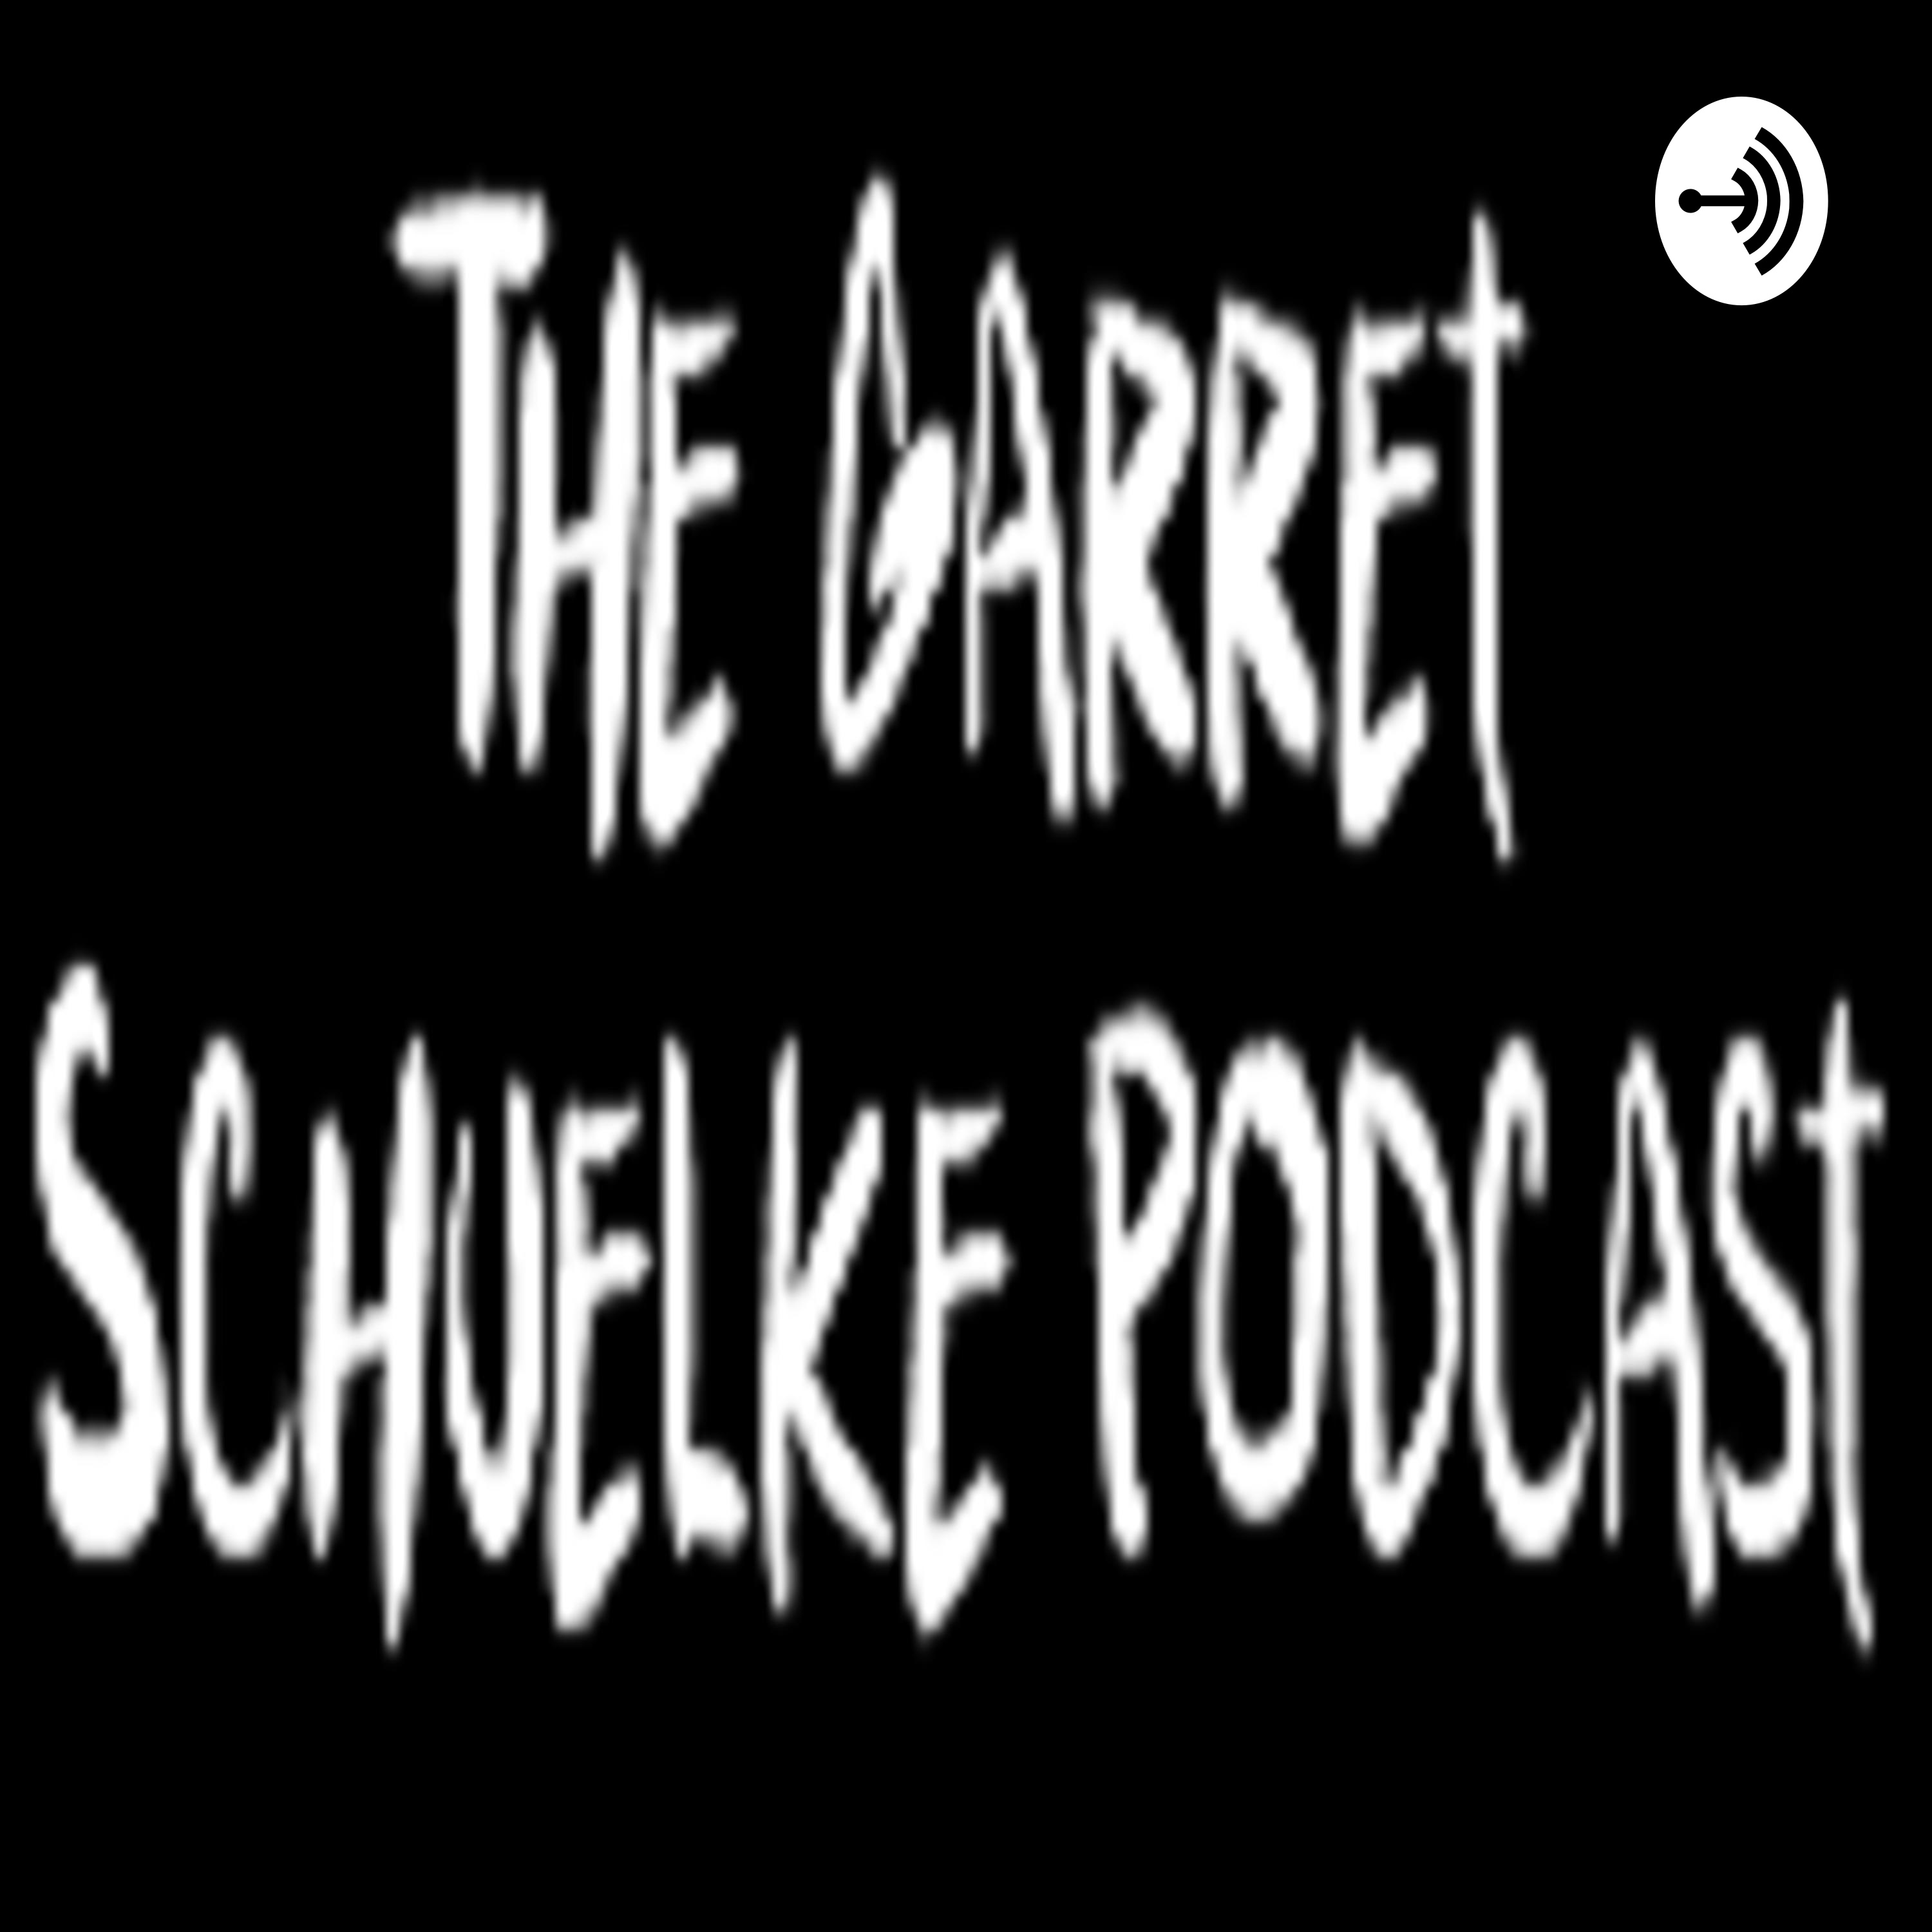 The Garret Schuelke Podcast Episode 4: Our Inevitable Fully Automated Luxury Gay Space Communism Future with John Withee And Zach Elmblad